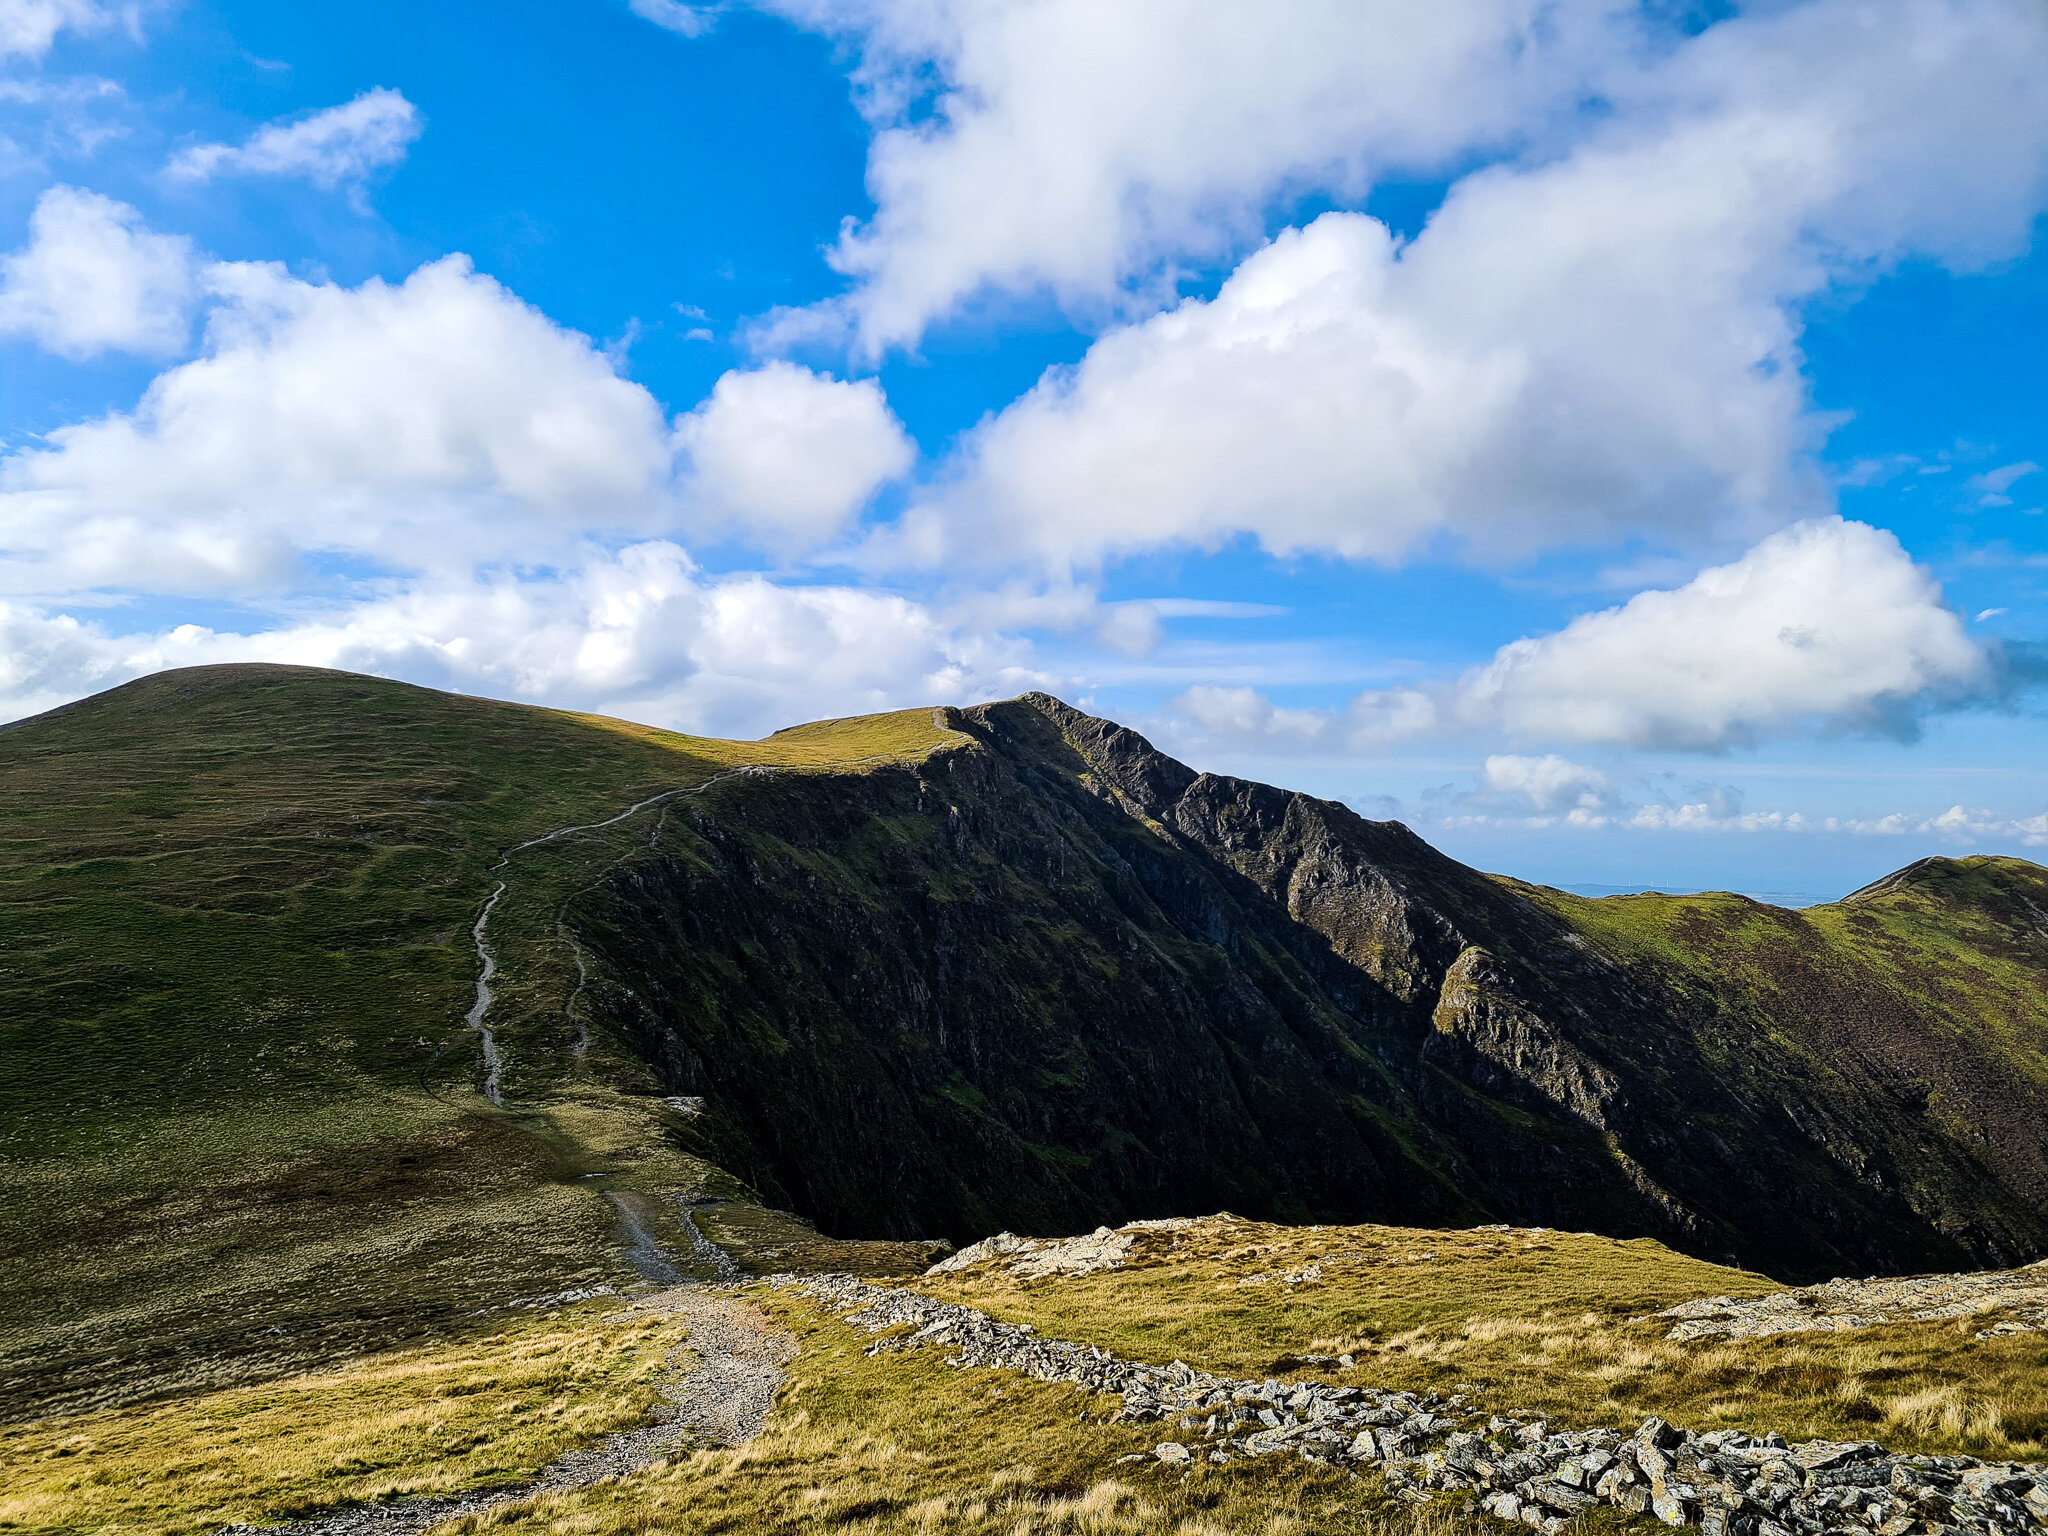 Ascent to Hopegill Head